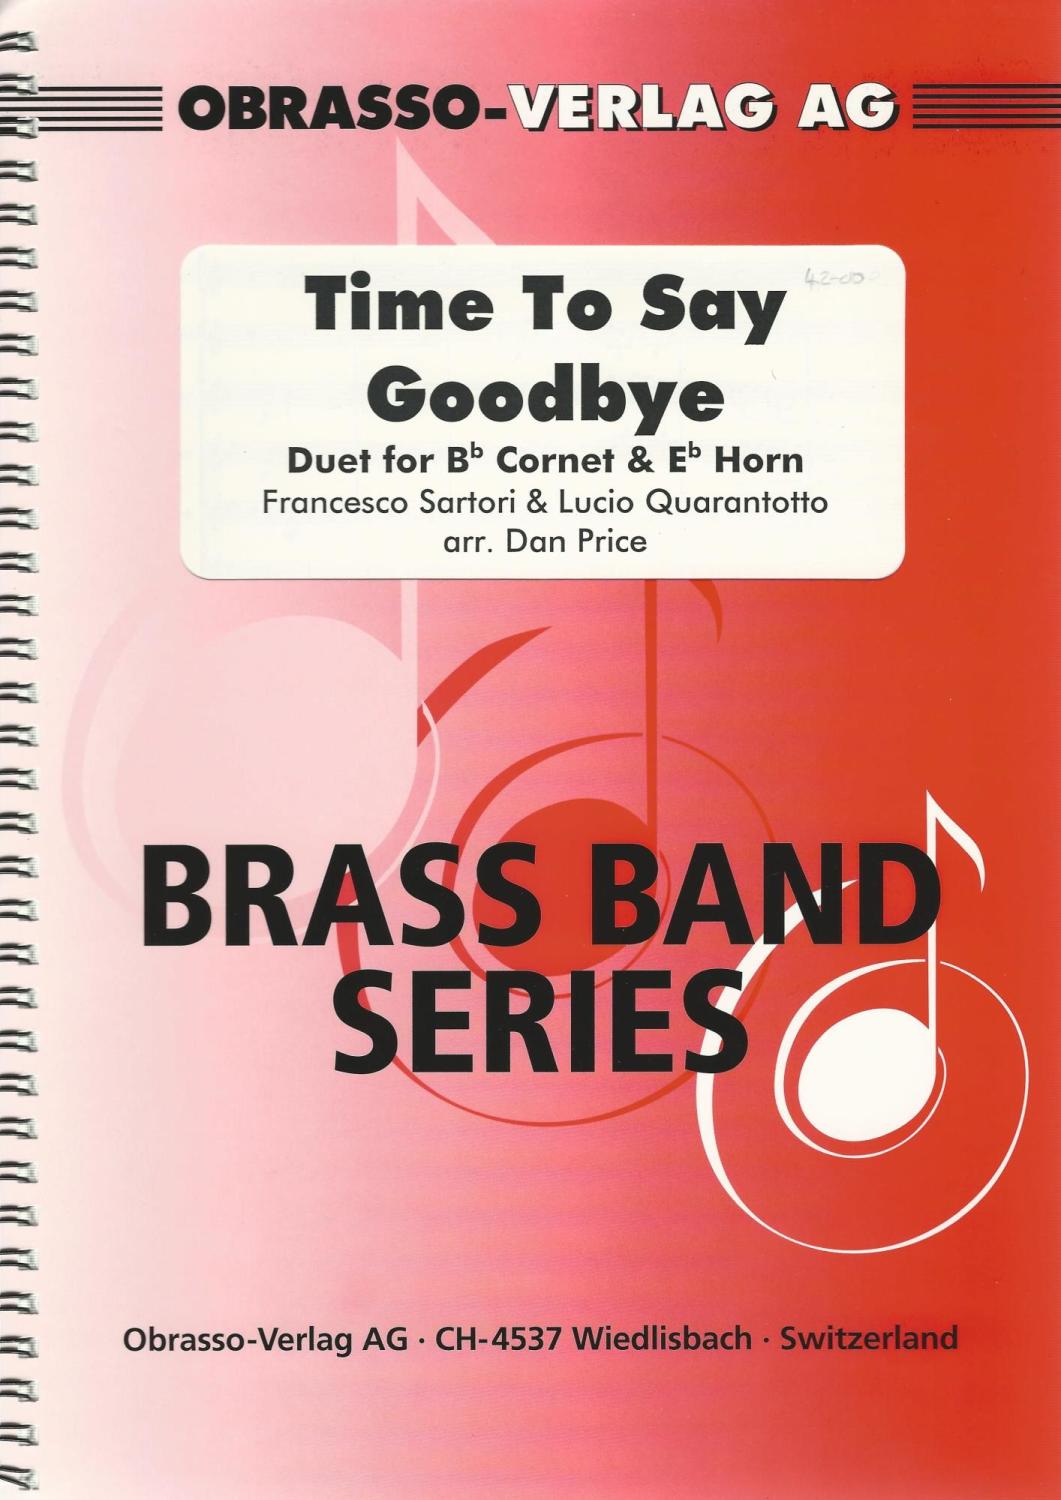 Time To Say Goodbye, Duet for Bb Cornet & Eb Horn and Brass Band - arr. Dan